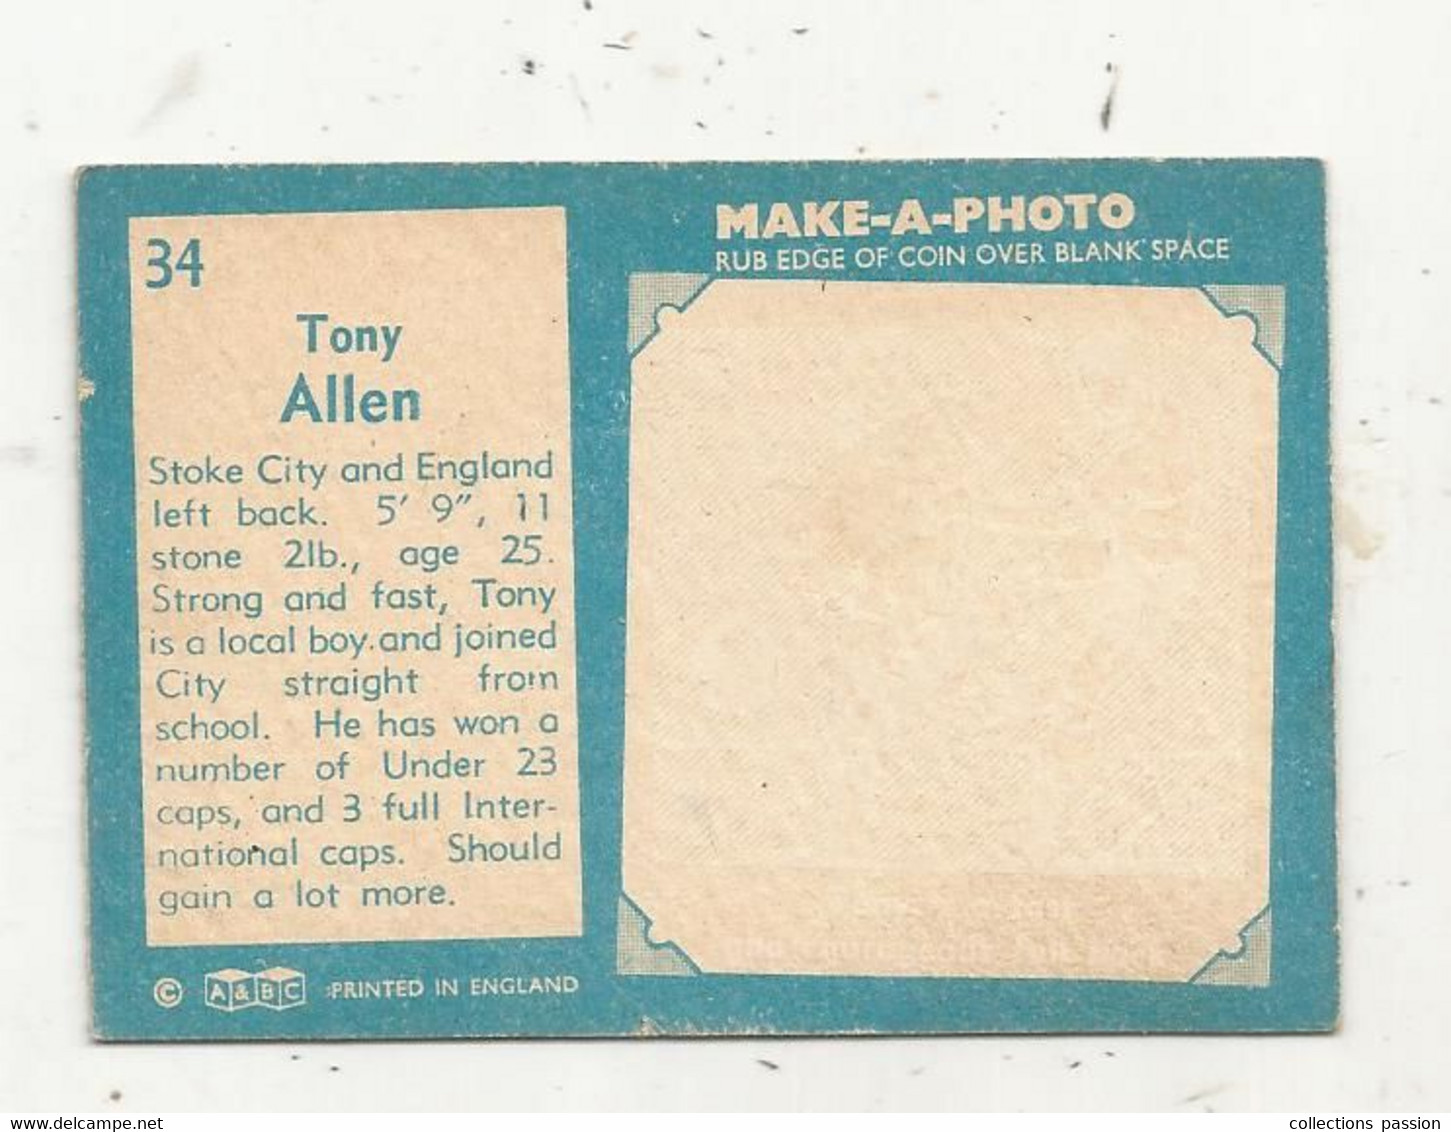 Trading Card , A&BC , England, Chewing Gum, Serie: Make A Photo , Année 60 , N° 34, TONNY ALLEN, Stoke City - Trading Cards